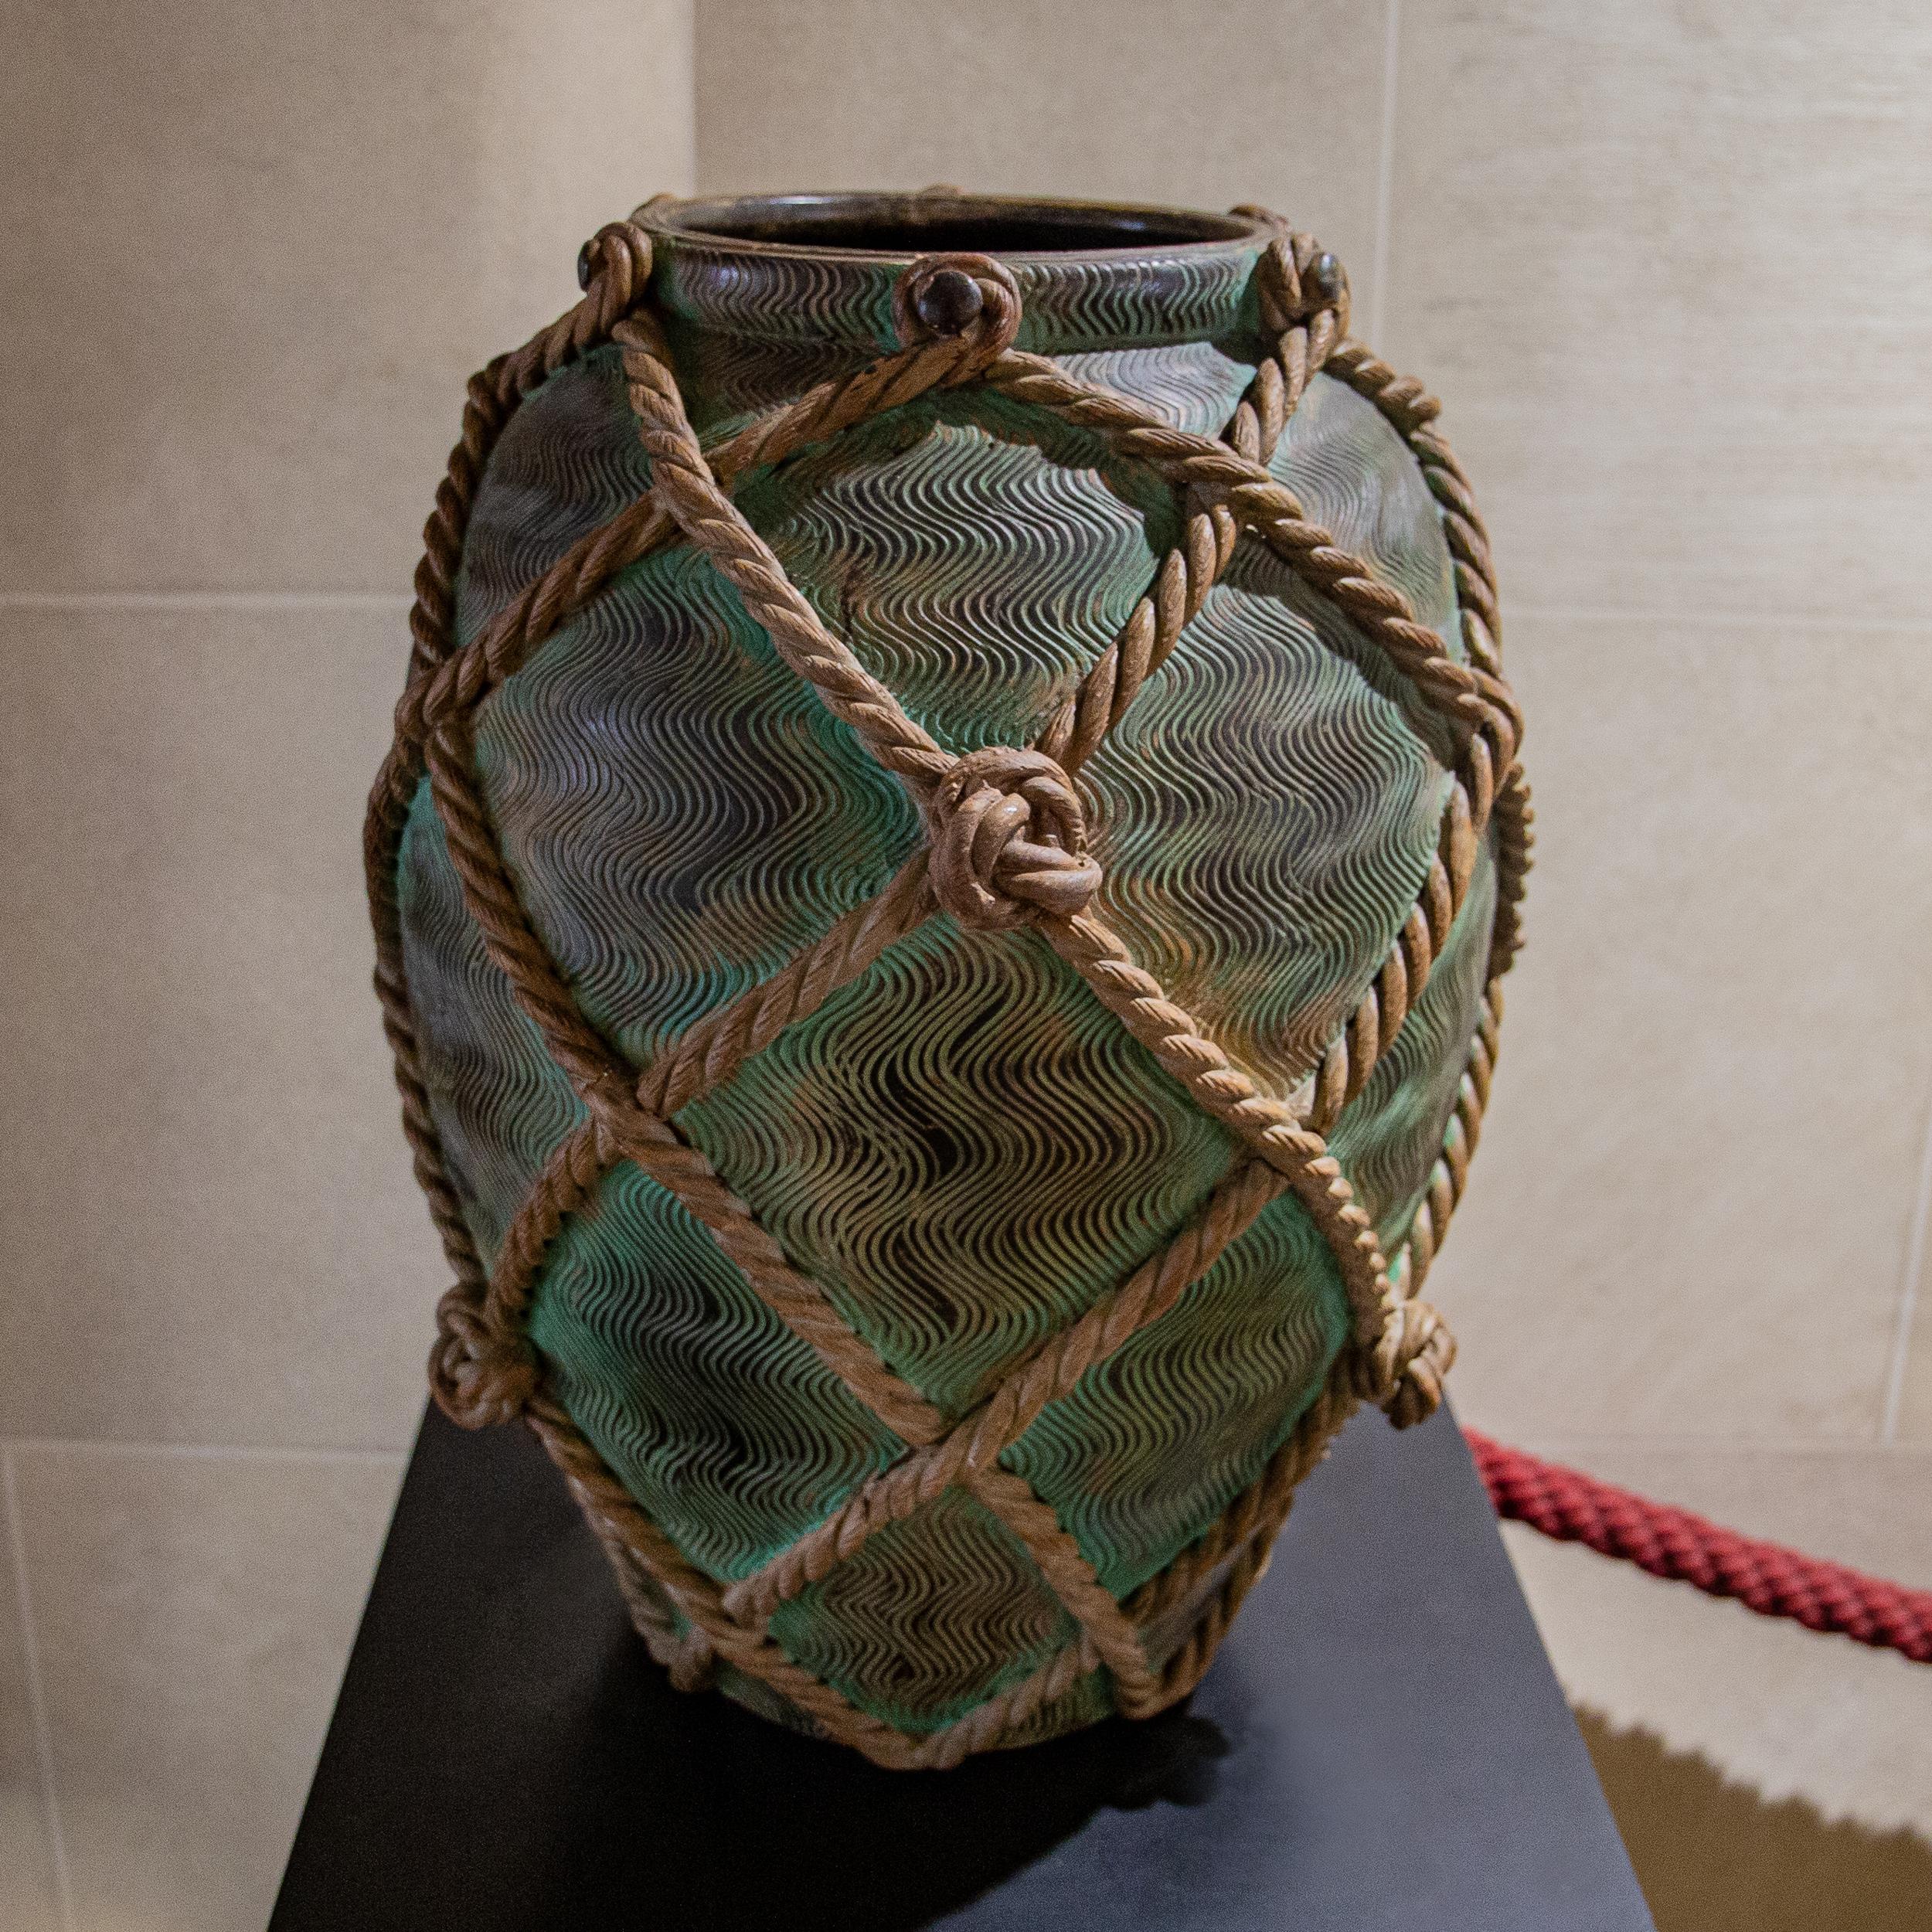 A work of art by the early 20th century by master sculptor Ugo Zaccagnini. Of generous scale, with verdigris bronze Roman strigil relief patterned body and simulated twisted and knotted rope design. Incredible ceramic work and detail, the rope